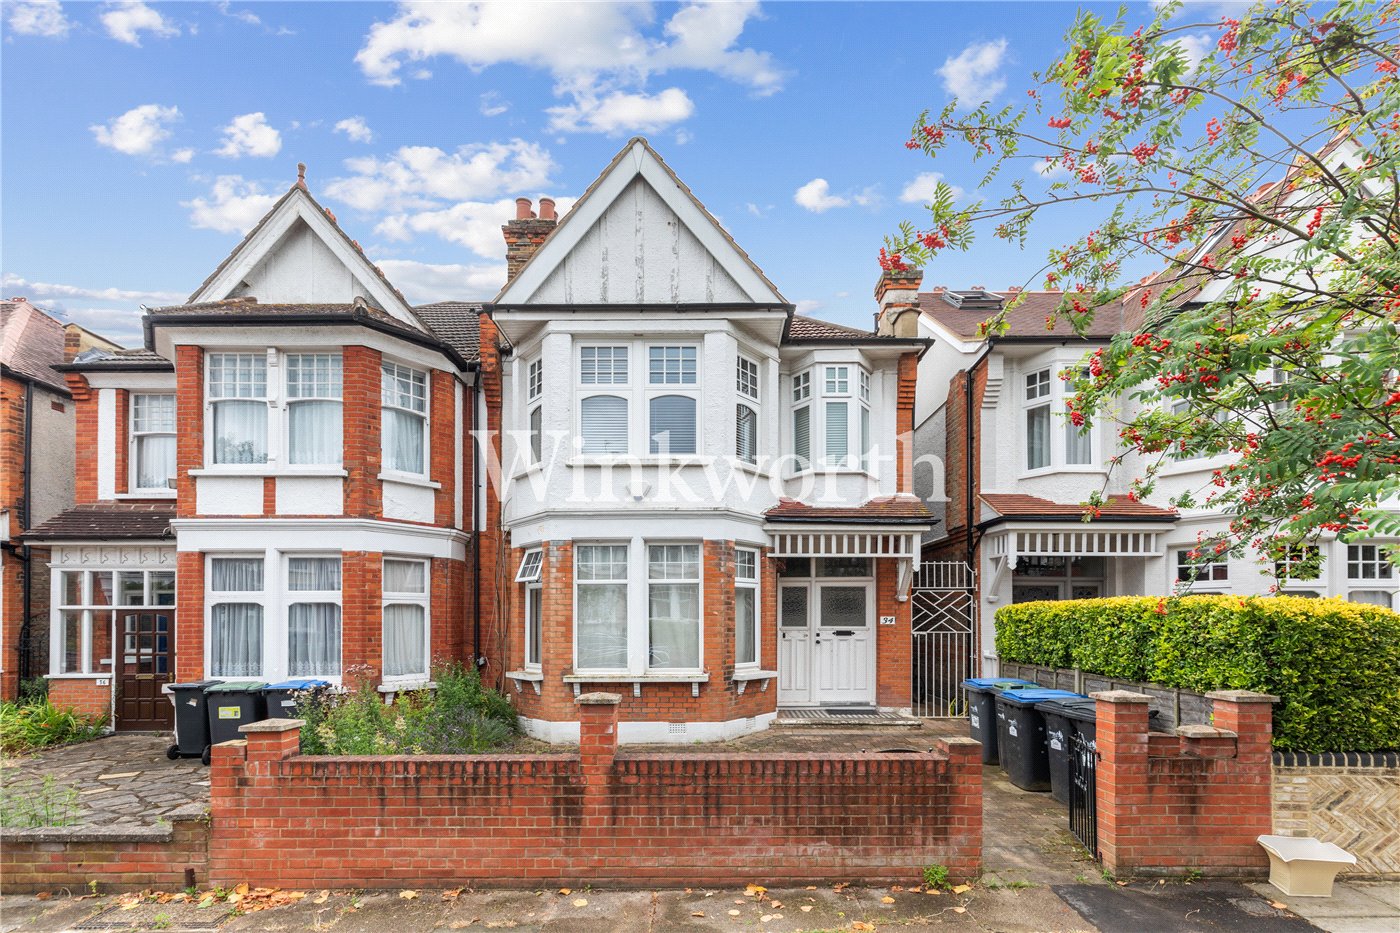 St. Georges Road, Palmers Green, London, N13